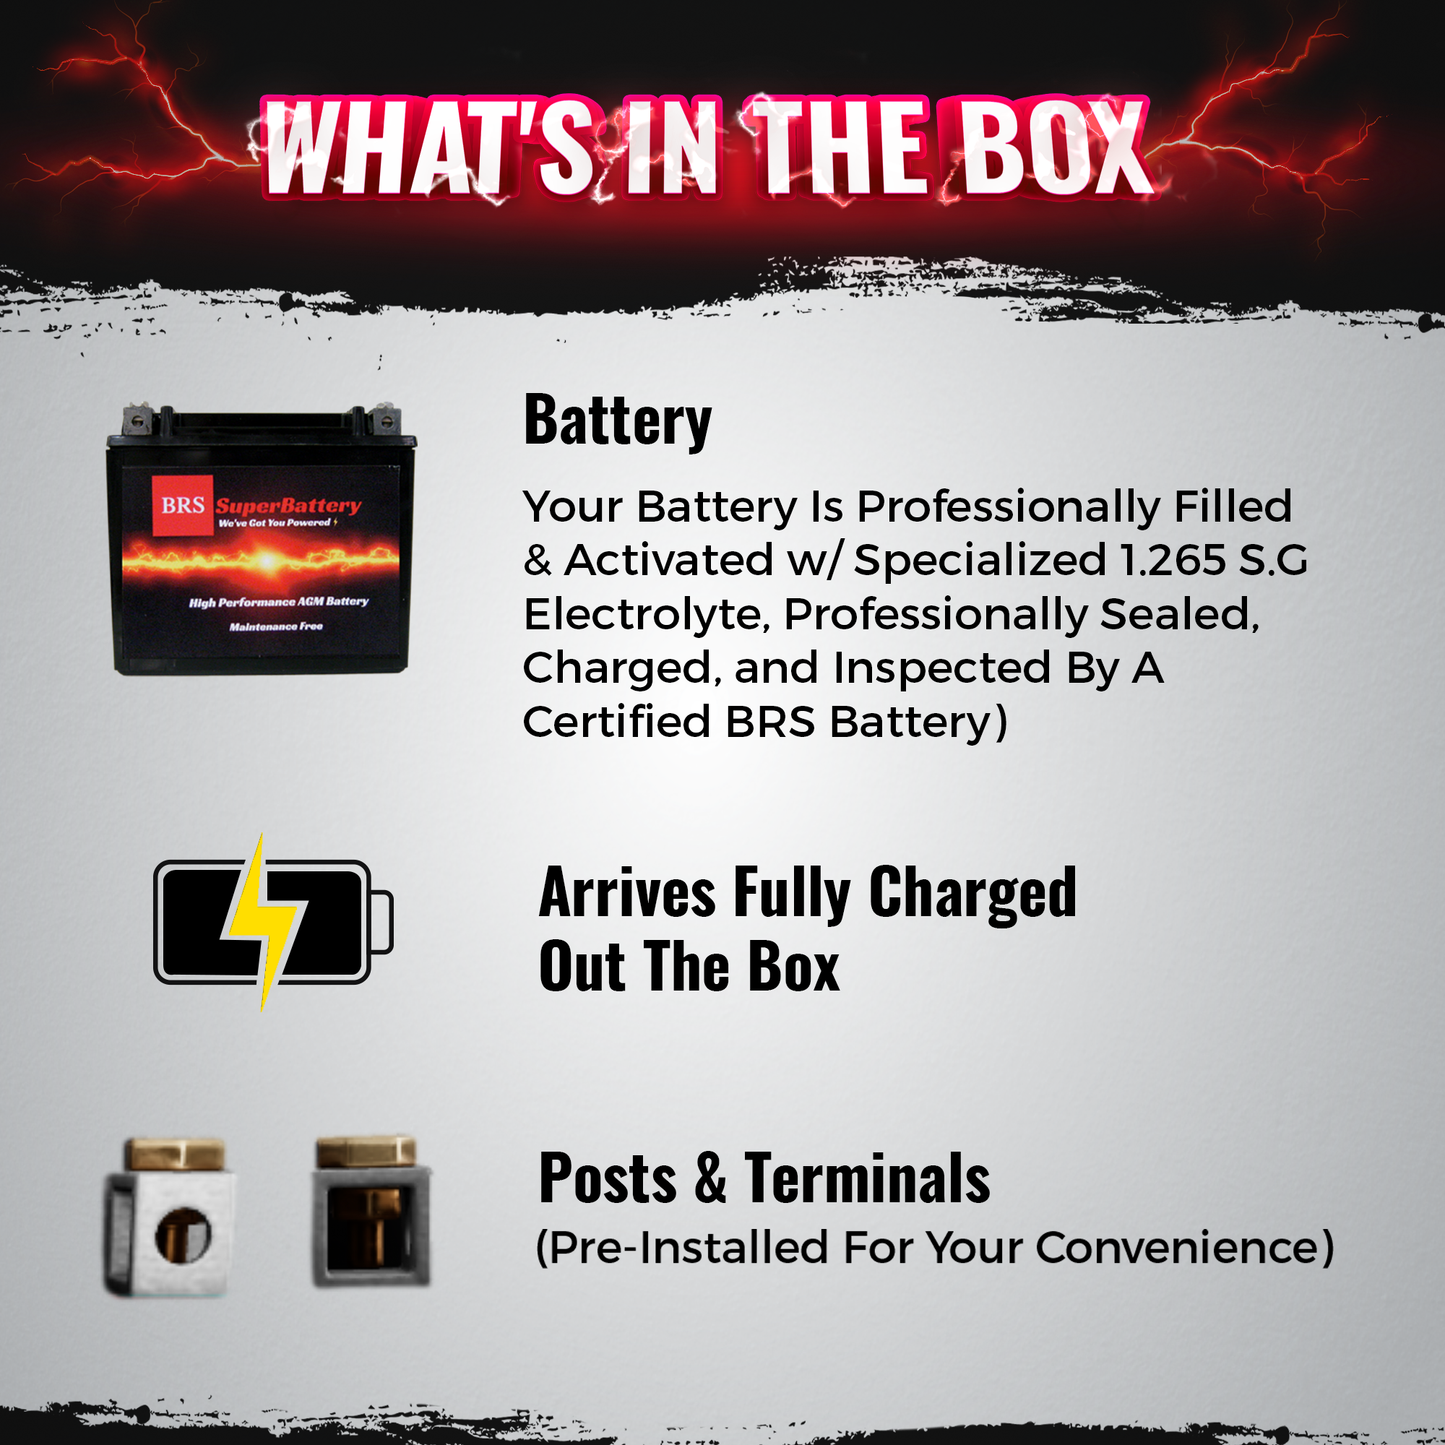 BRS20-BS 12v High Performance Sealed AGM PowerSport 2 Year Battery - BRS Super Battery